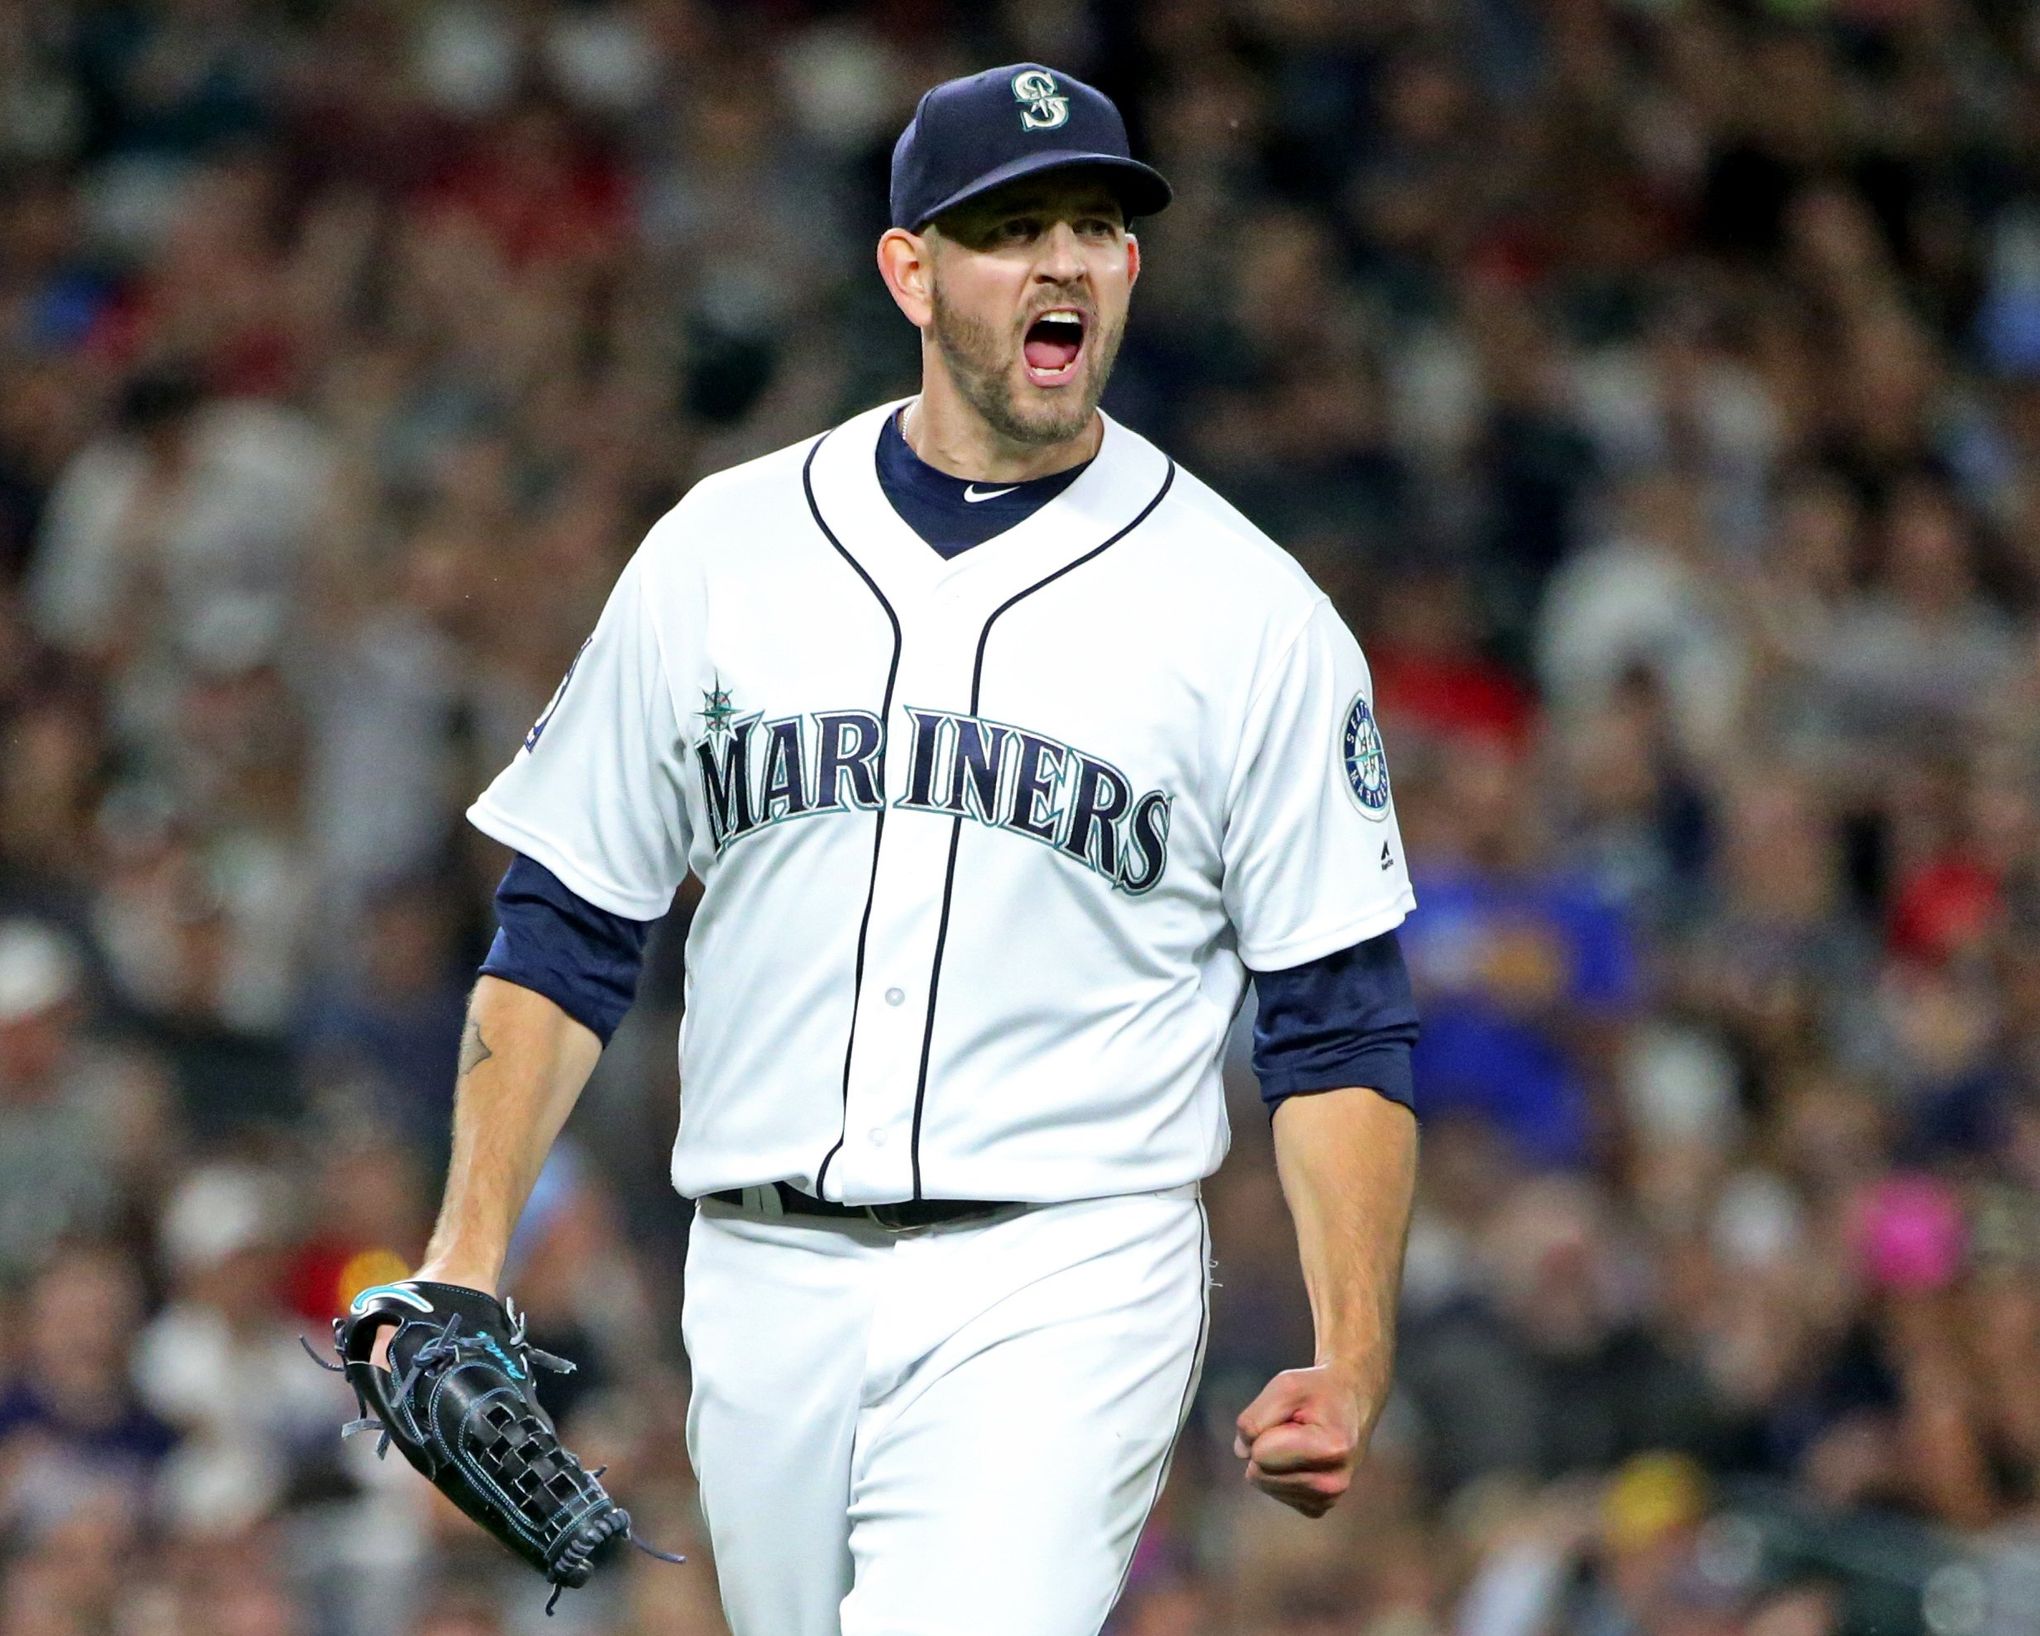 Mariners pitchers James Paxton and Edwin Diaz take home monthly